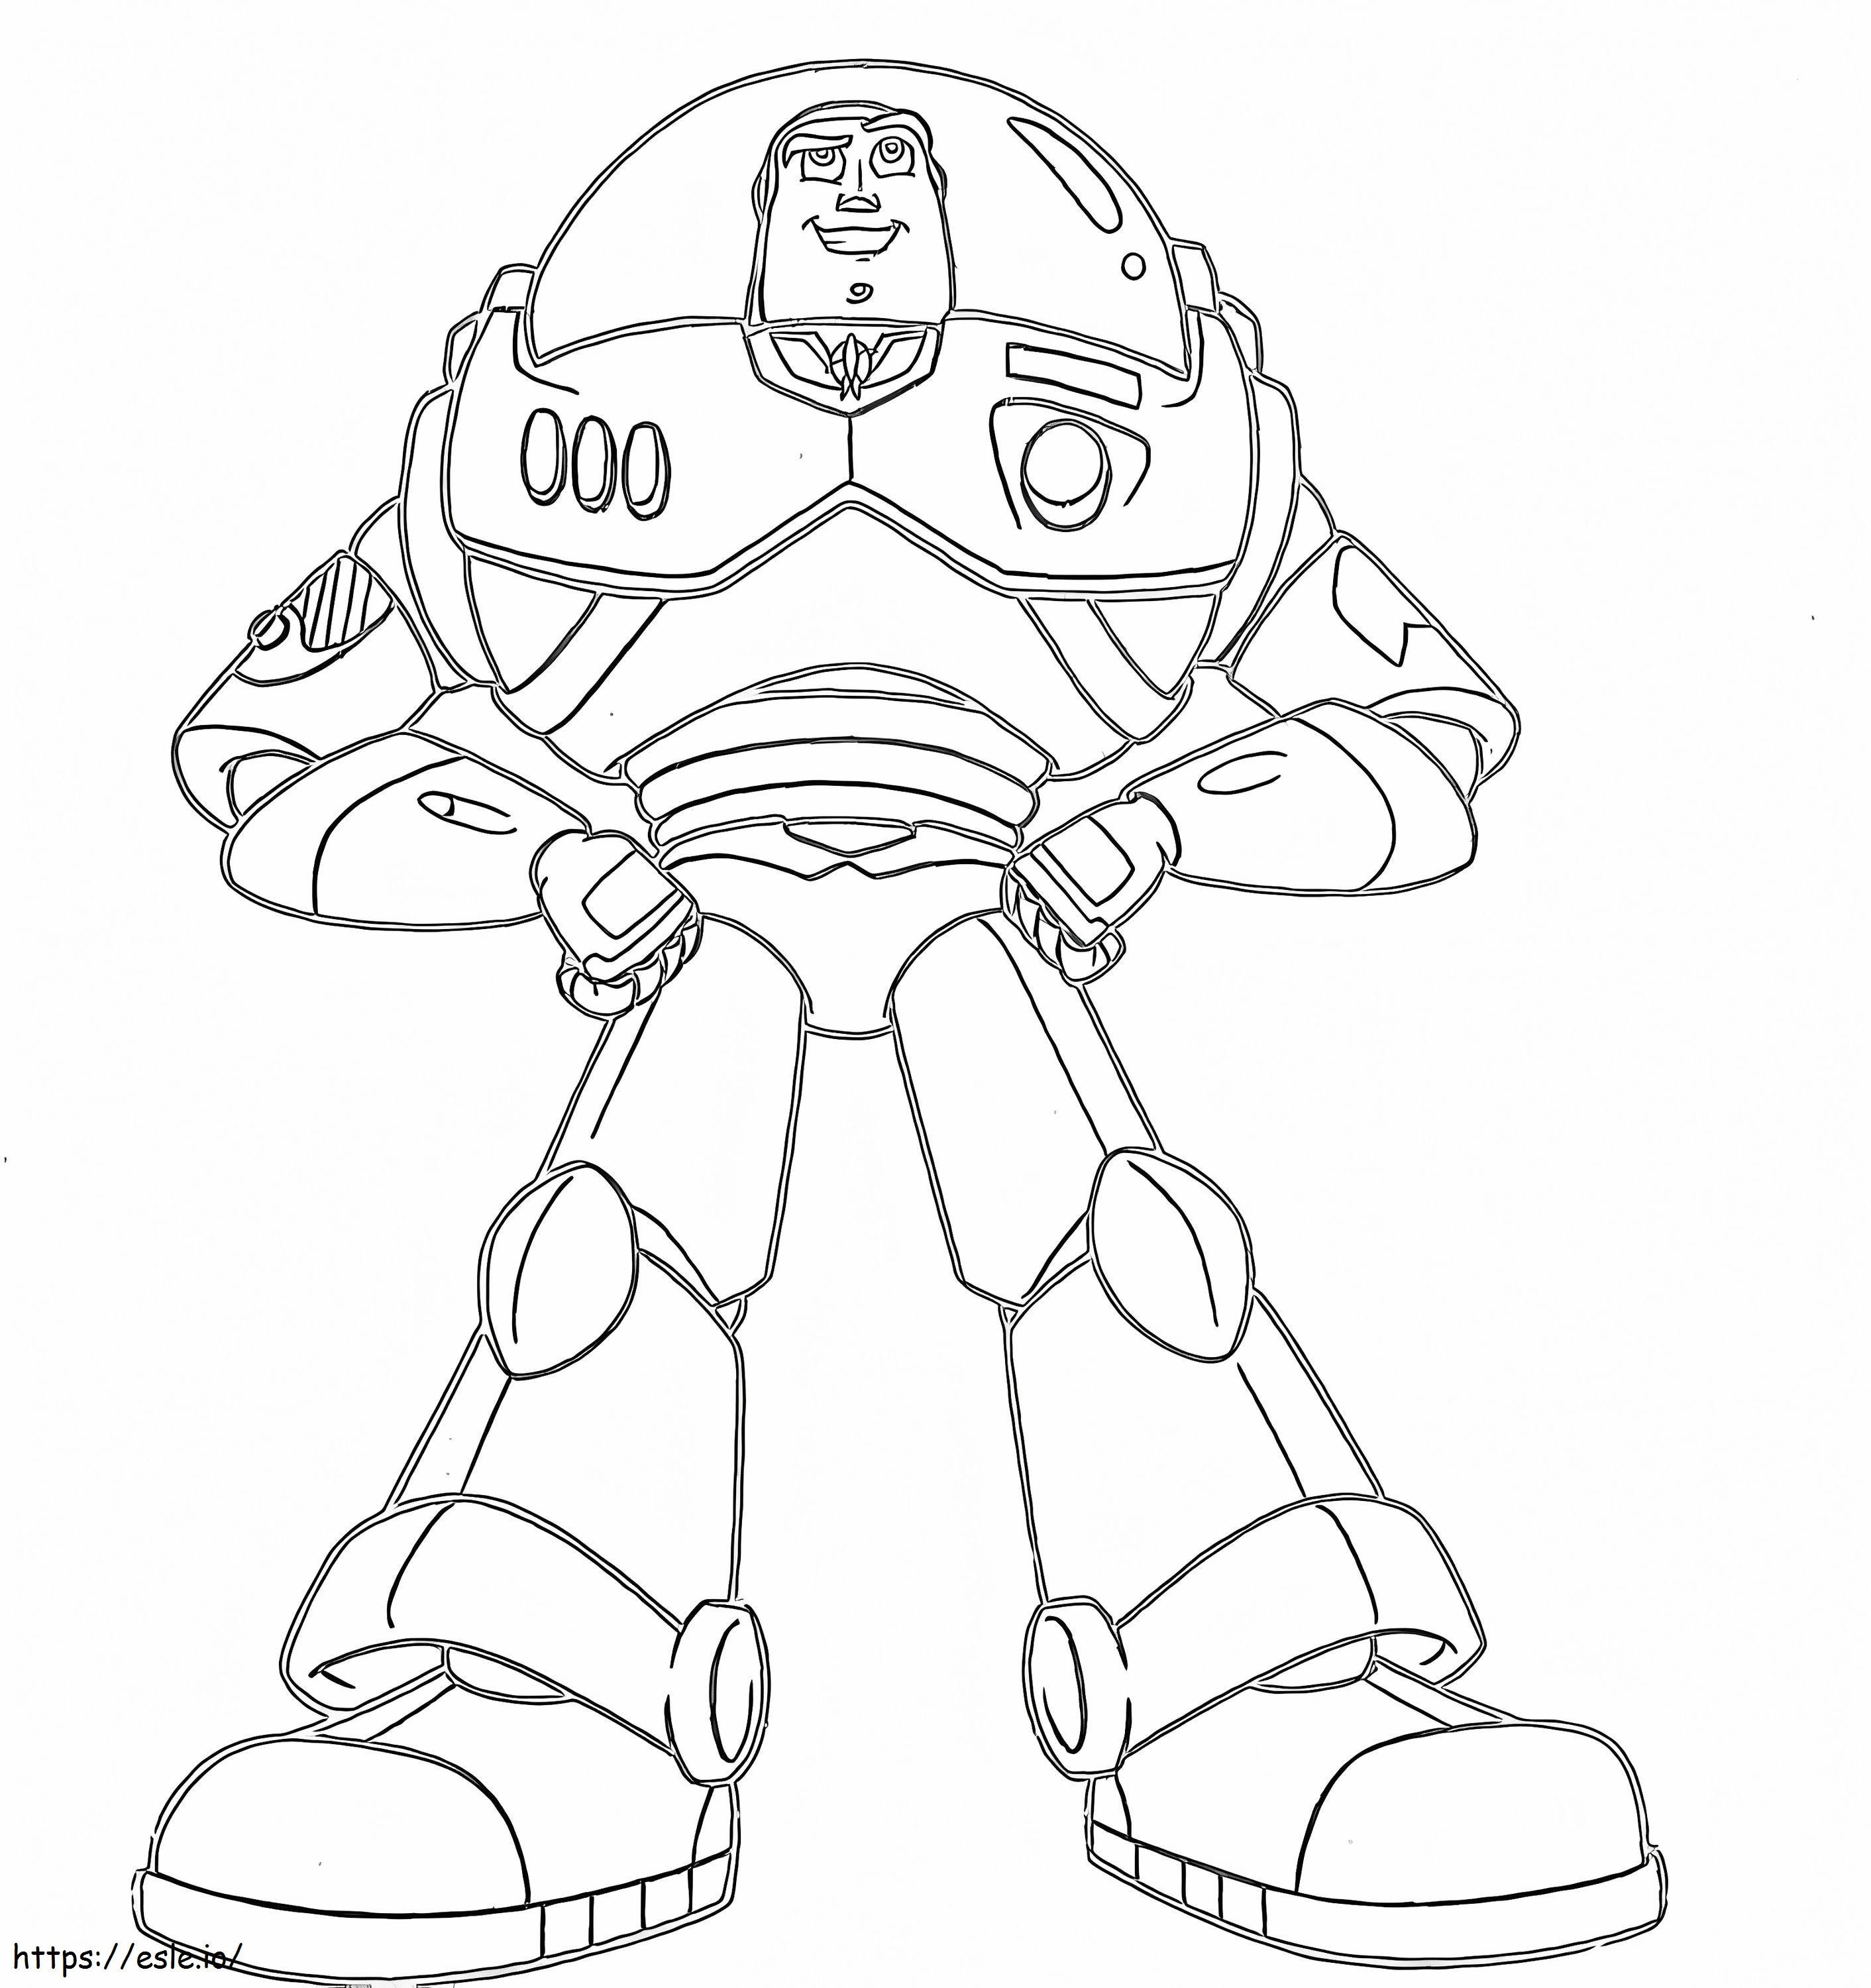 Buzz Lightyear 4 coloring page